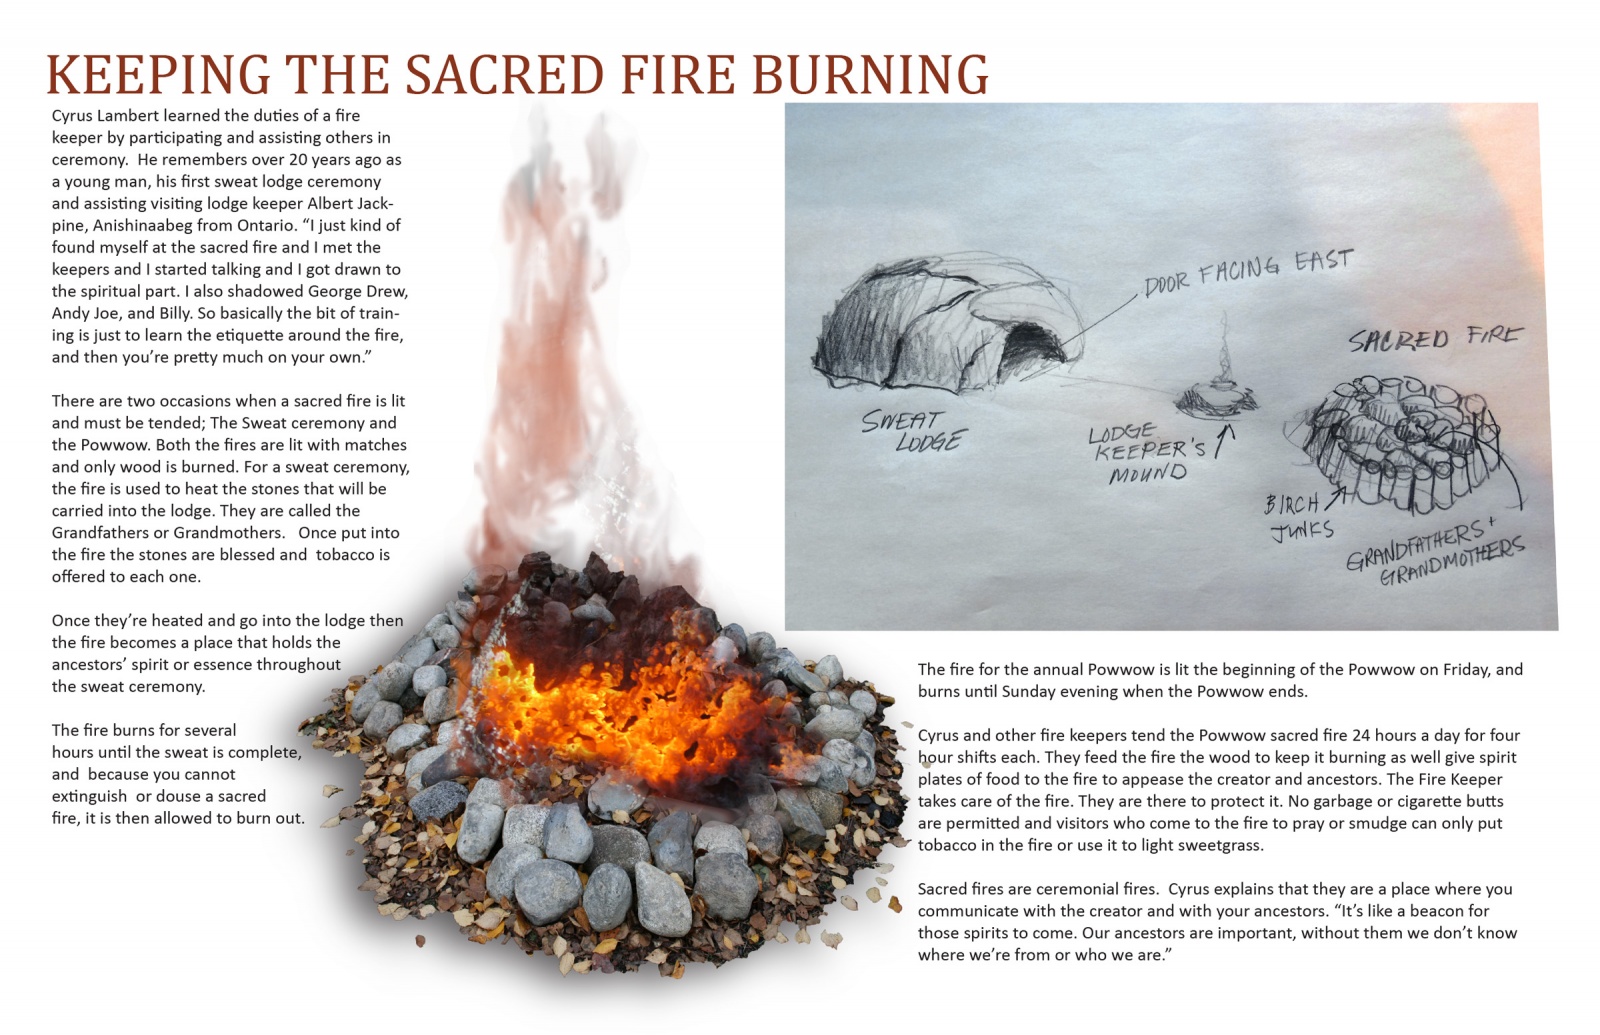 Keeping the Sacred Fire Burning